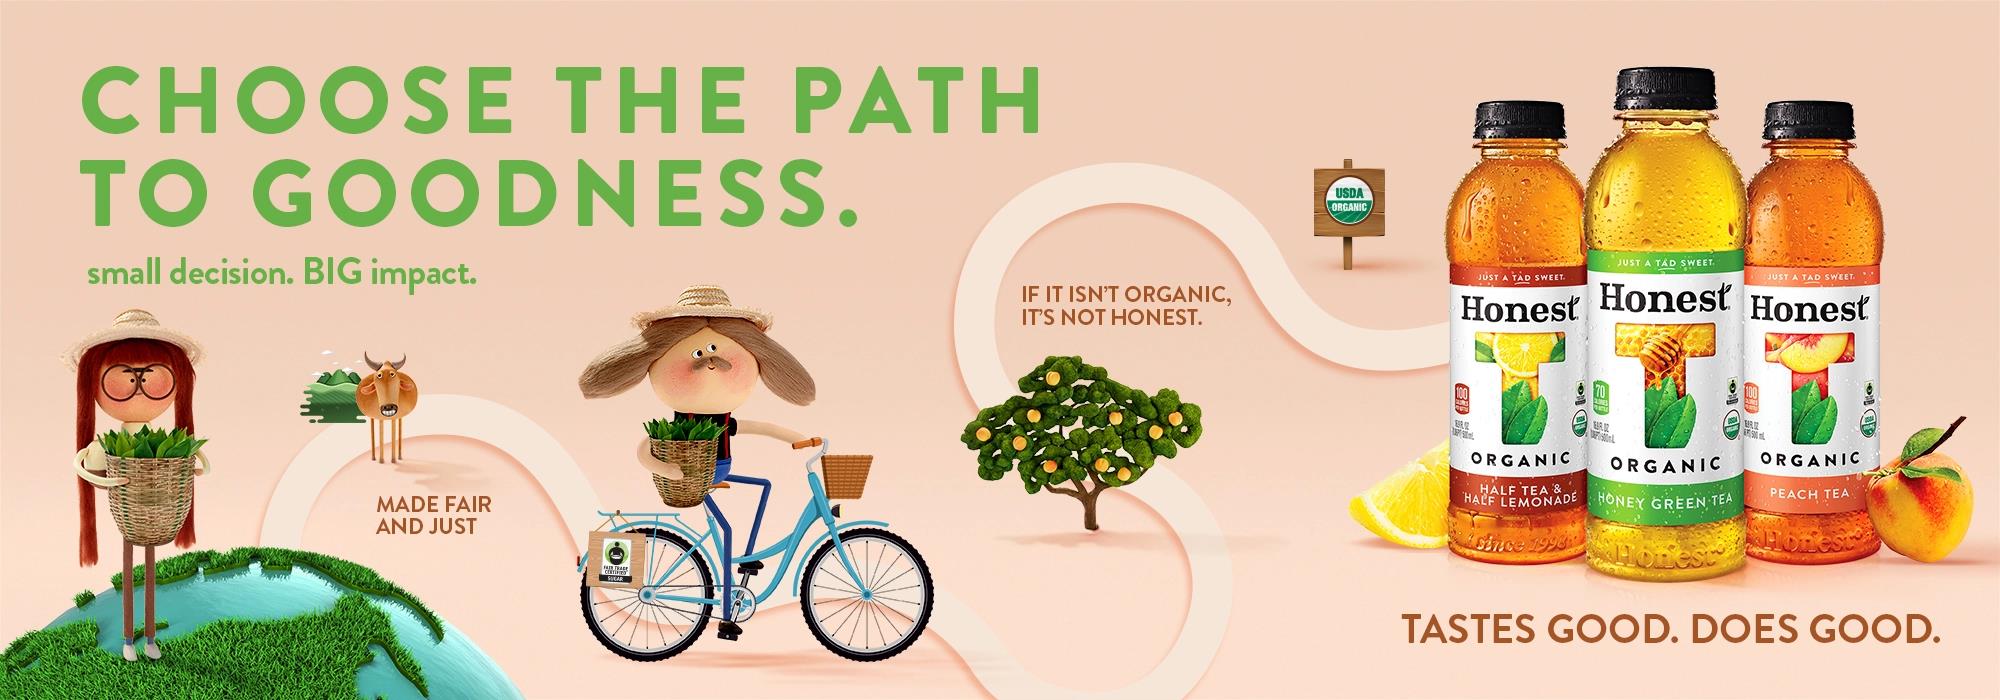 Honest Tea - Choose the Path to Goodness Campaign